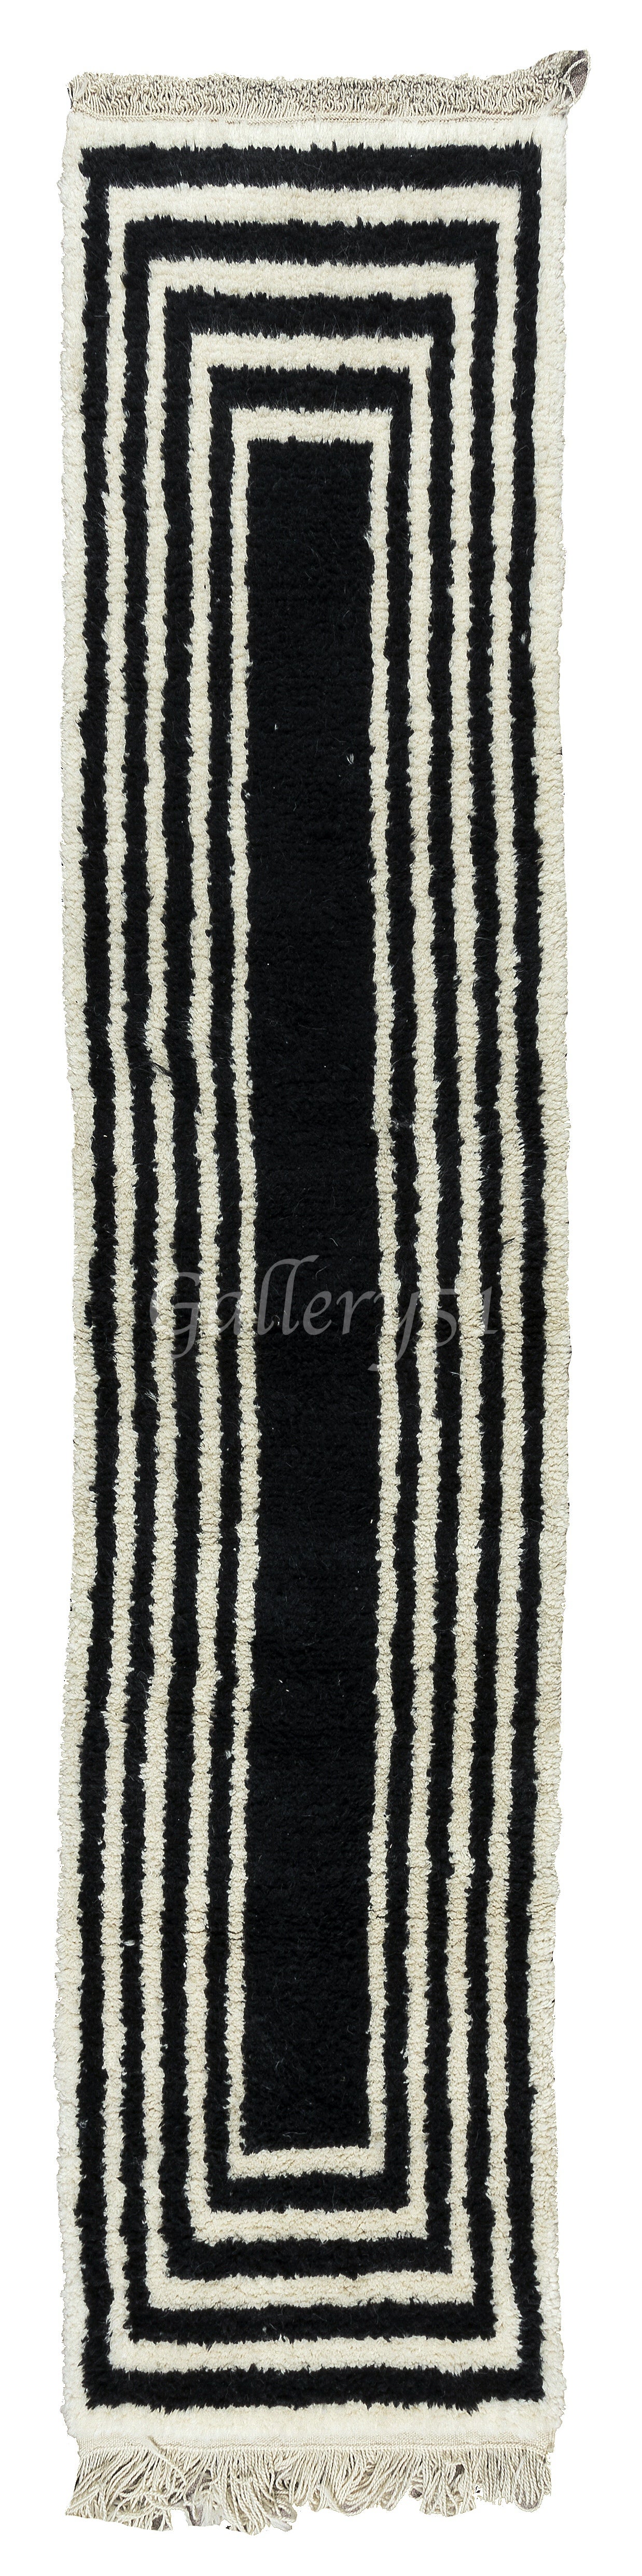 Hand-Knotted "Tulu" Runner Rug Made of Black & Cream Wool, Custom Options Avail. For Sale